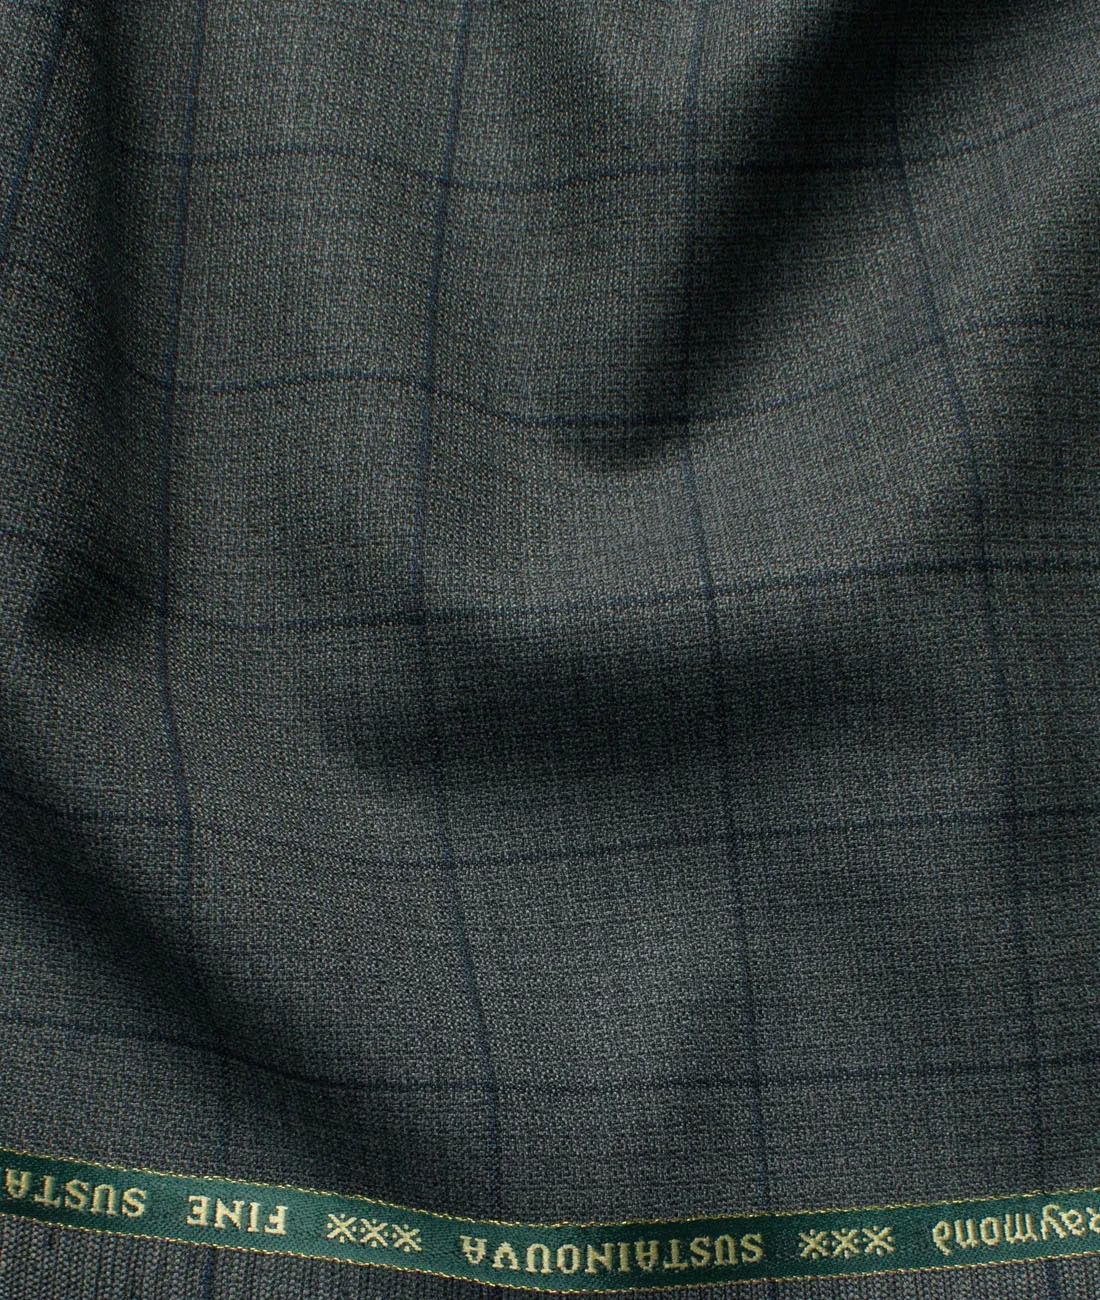 Wool Checks Super 100GÇÖs Unstitched Suiting Fabric (Dark Grey) Pattern Checks Feel Very Fine and Soft Color Dark Grey Structured base with Blue Check